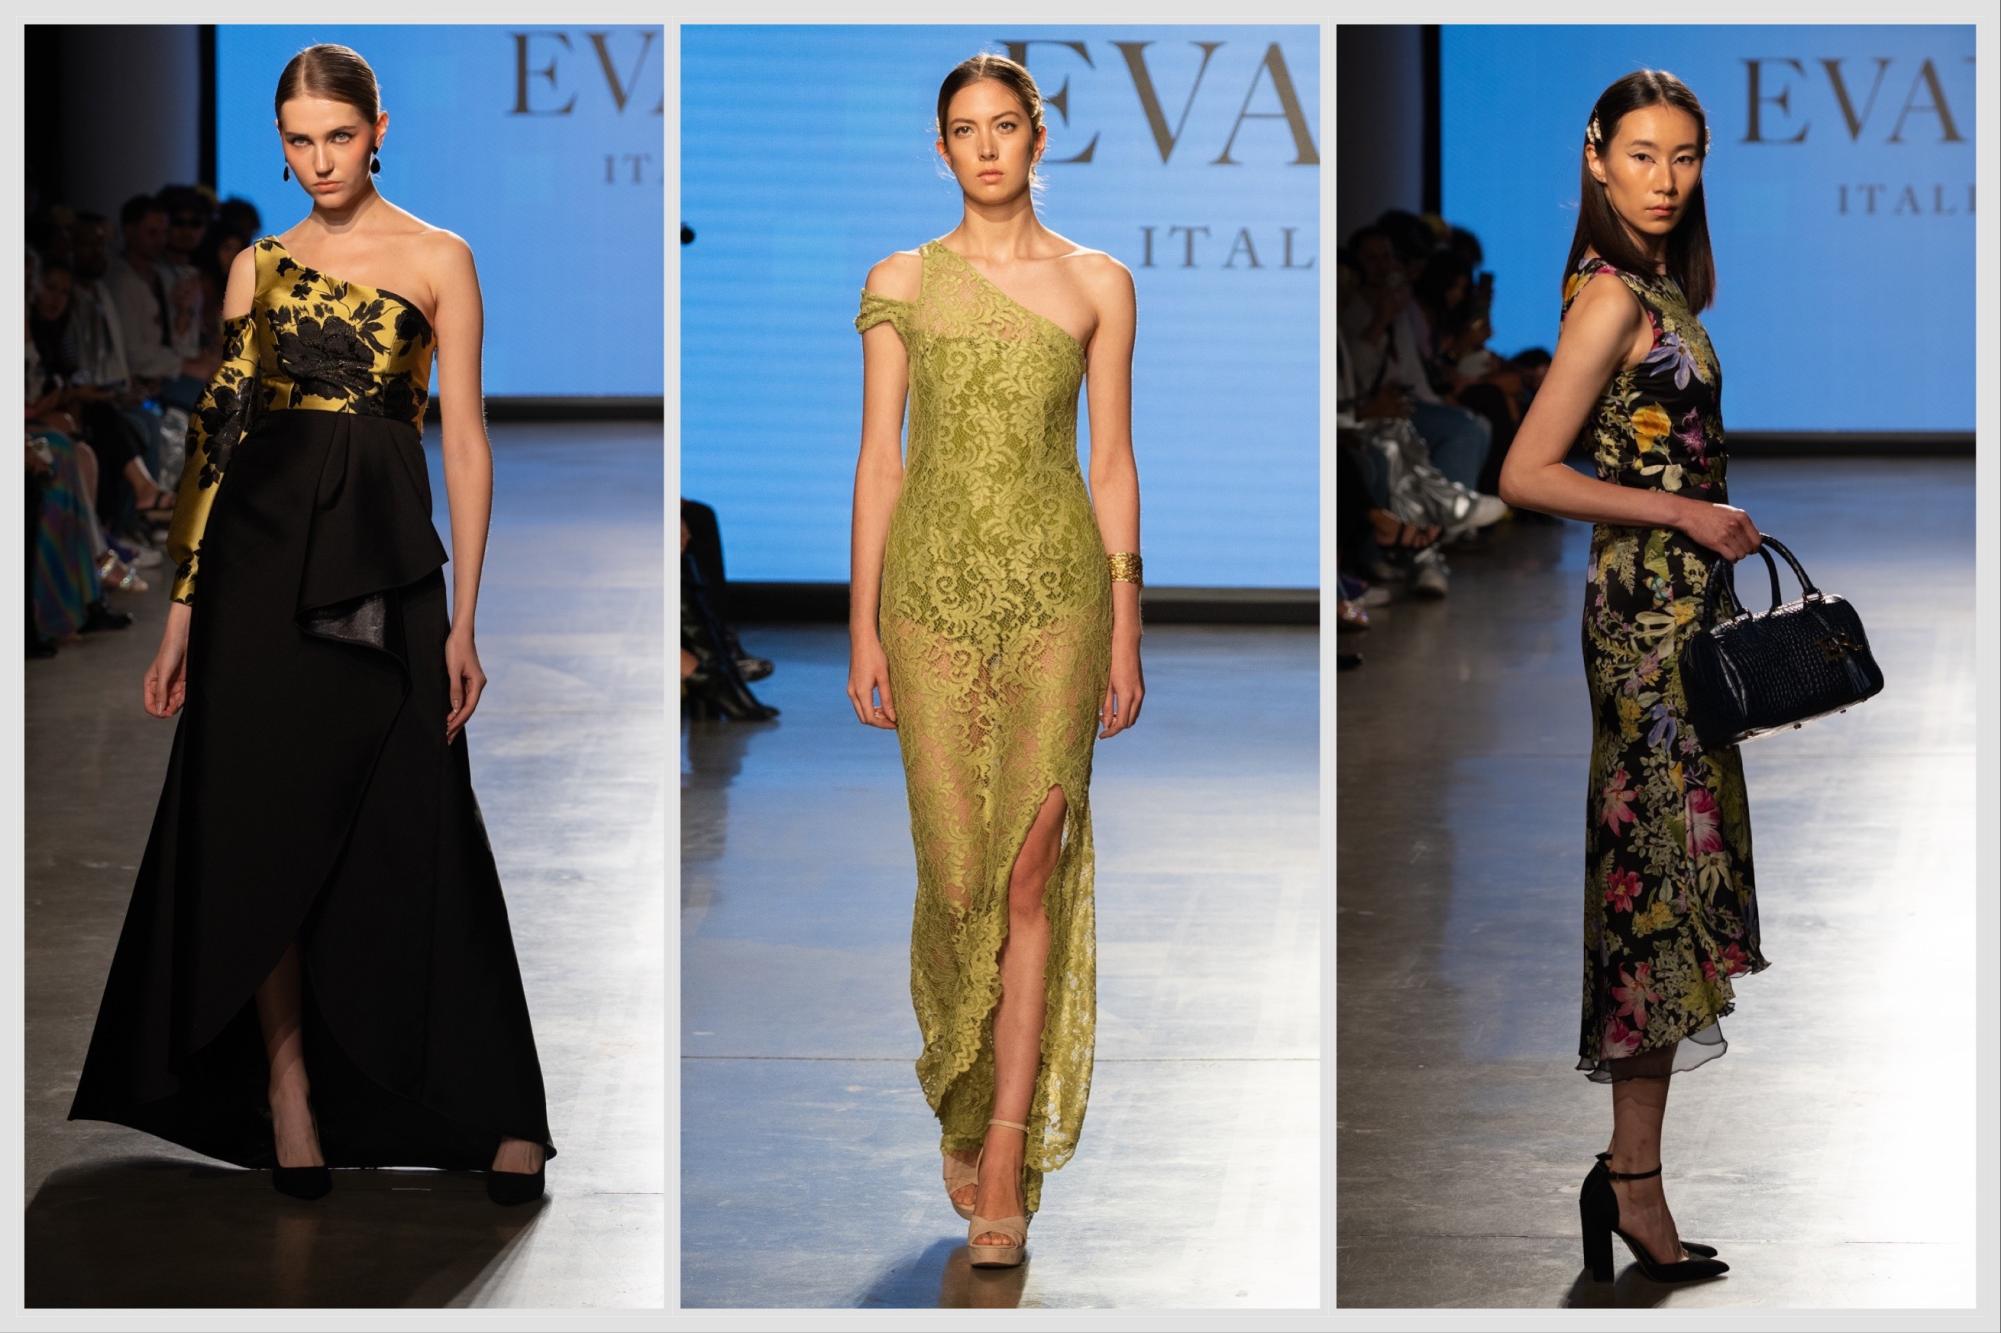 From left to right: a model wearing a black-and gold floral top and a black long skirt; a model wearing a green lace dress; a model wearing a blue floral dress holding a black handbag.